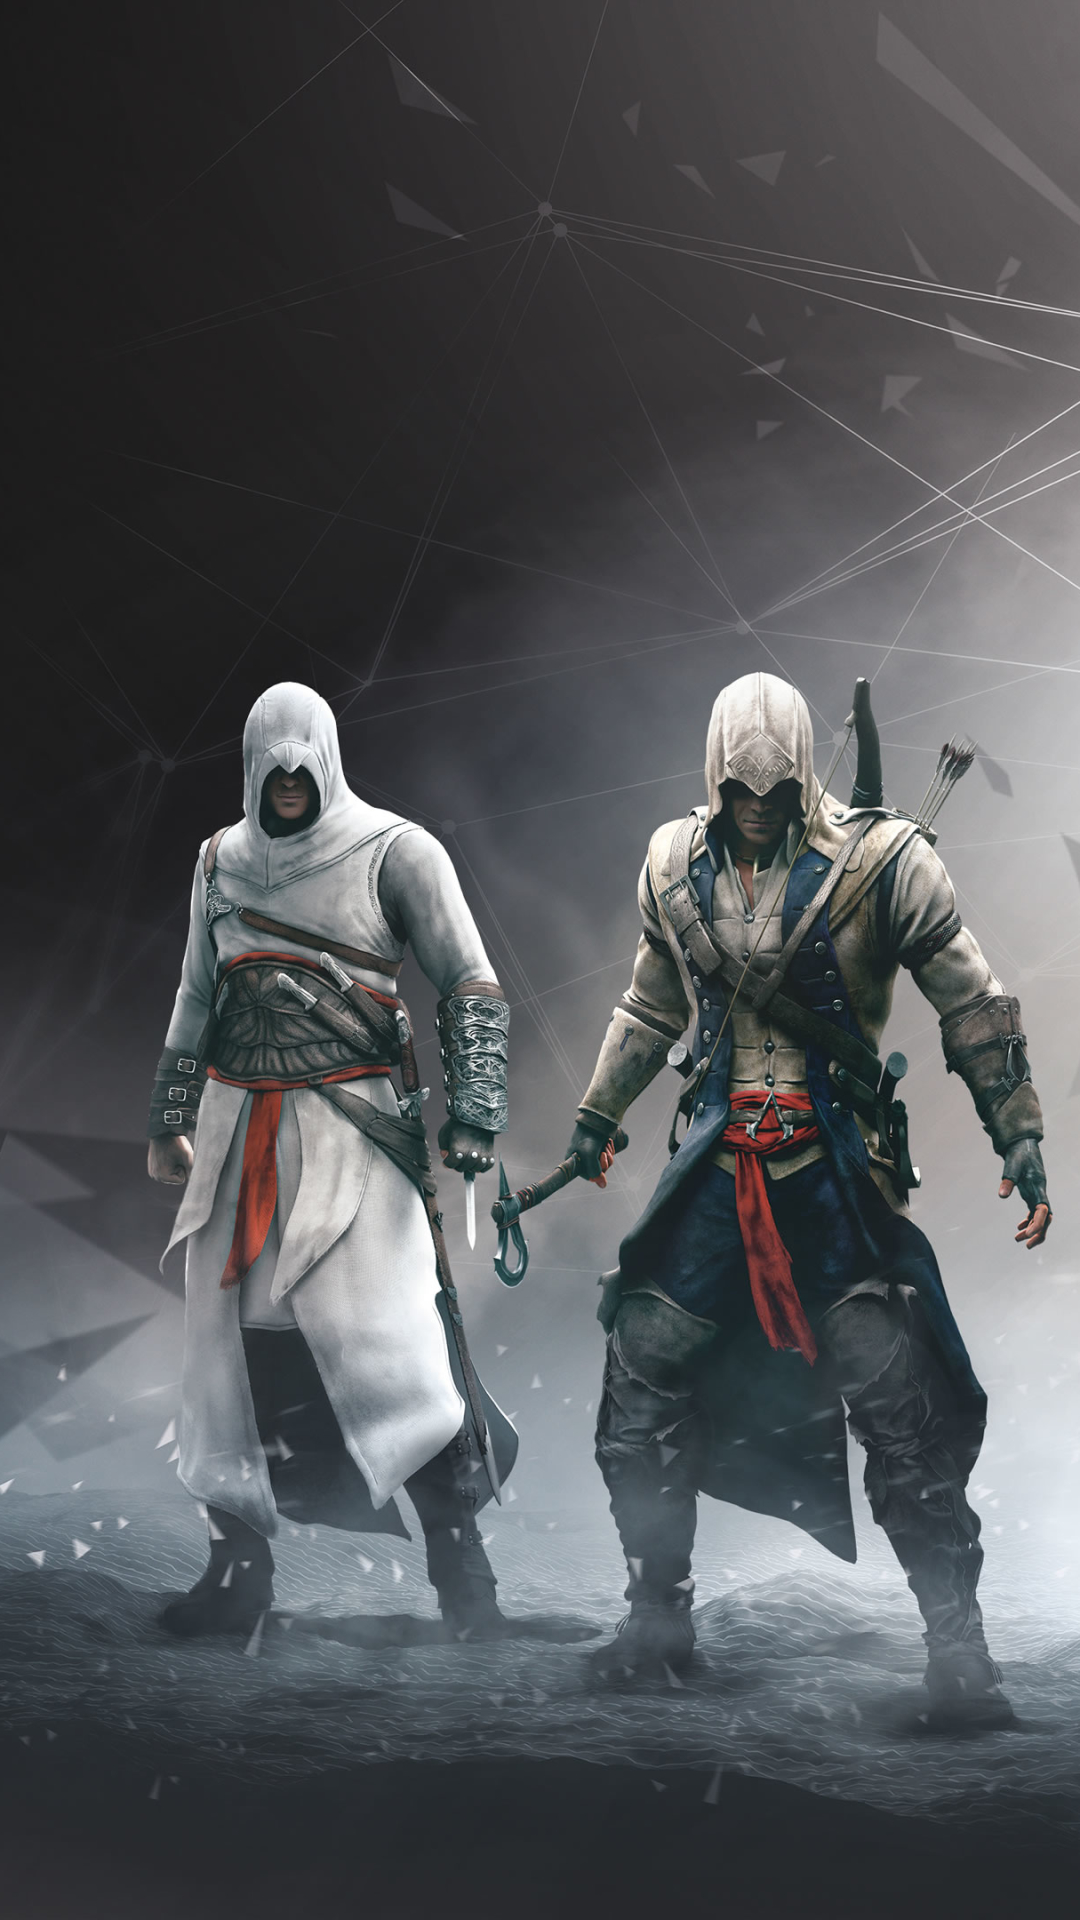 edward kenway, connor (assassin's creed), video game, assassin's creed, ezio (assassin's creed), altair (assassin's creed), jacob frye HD wallpaper